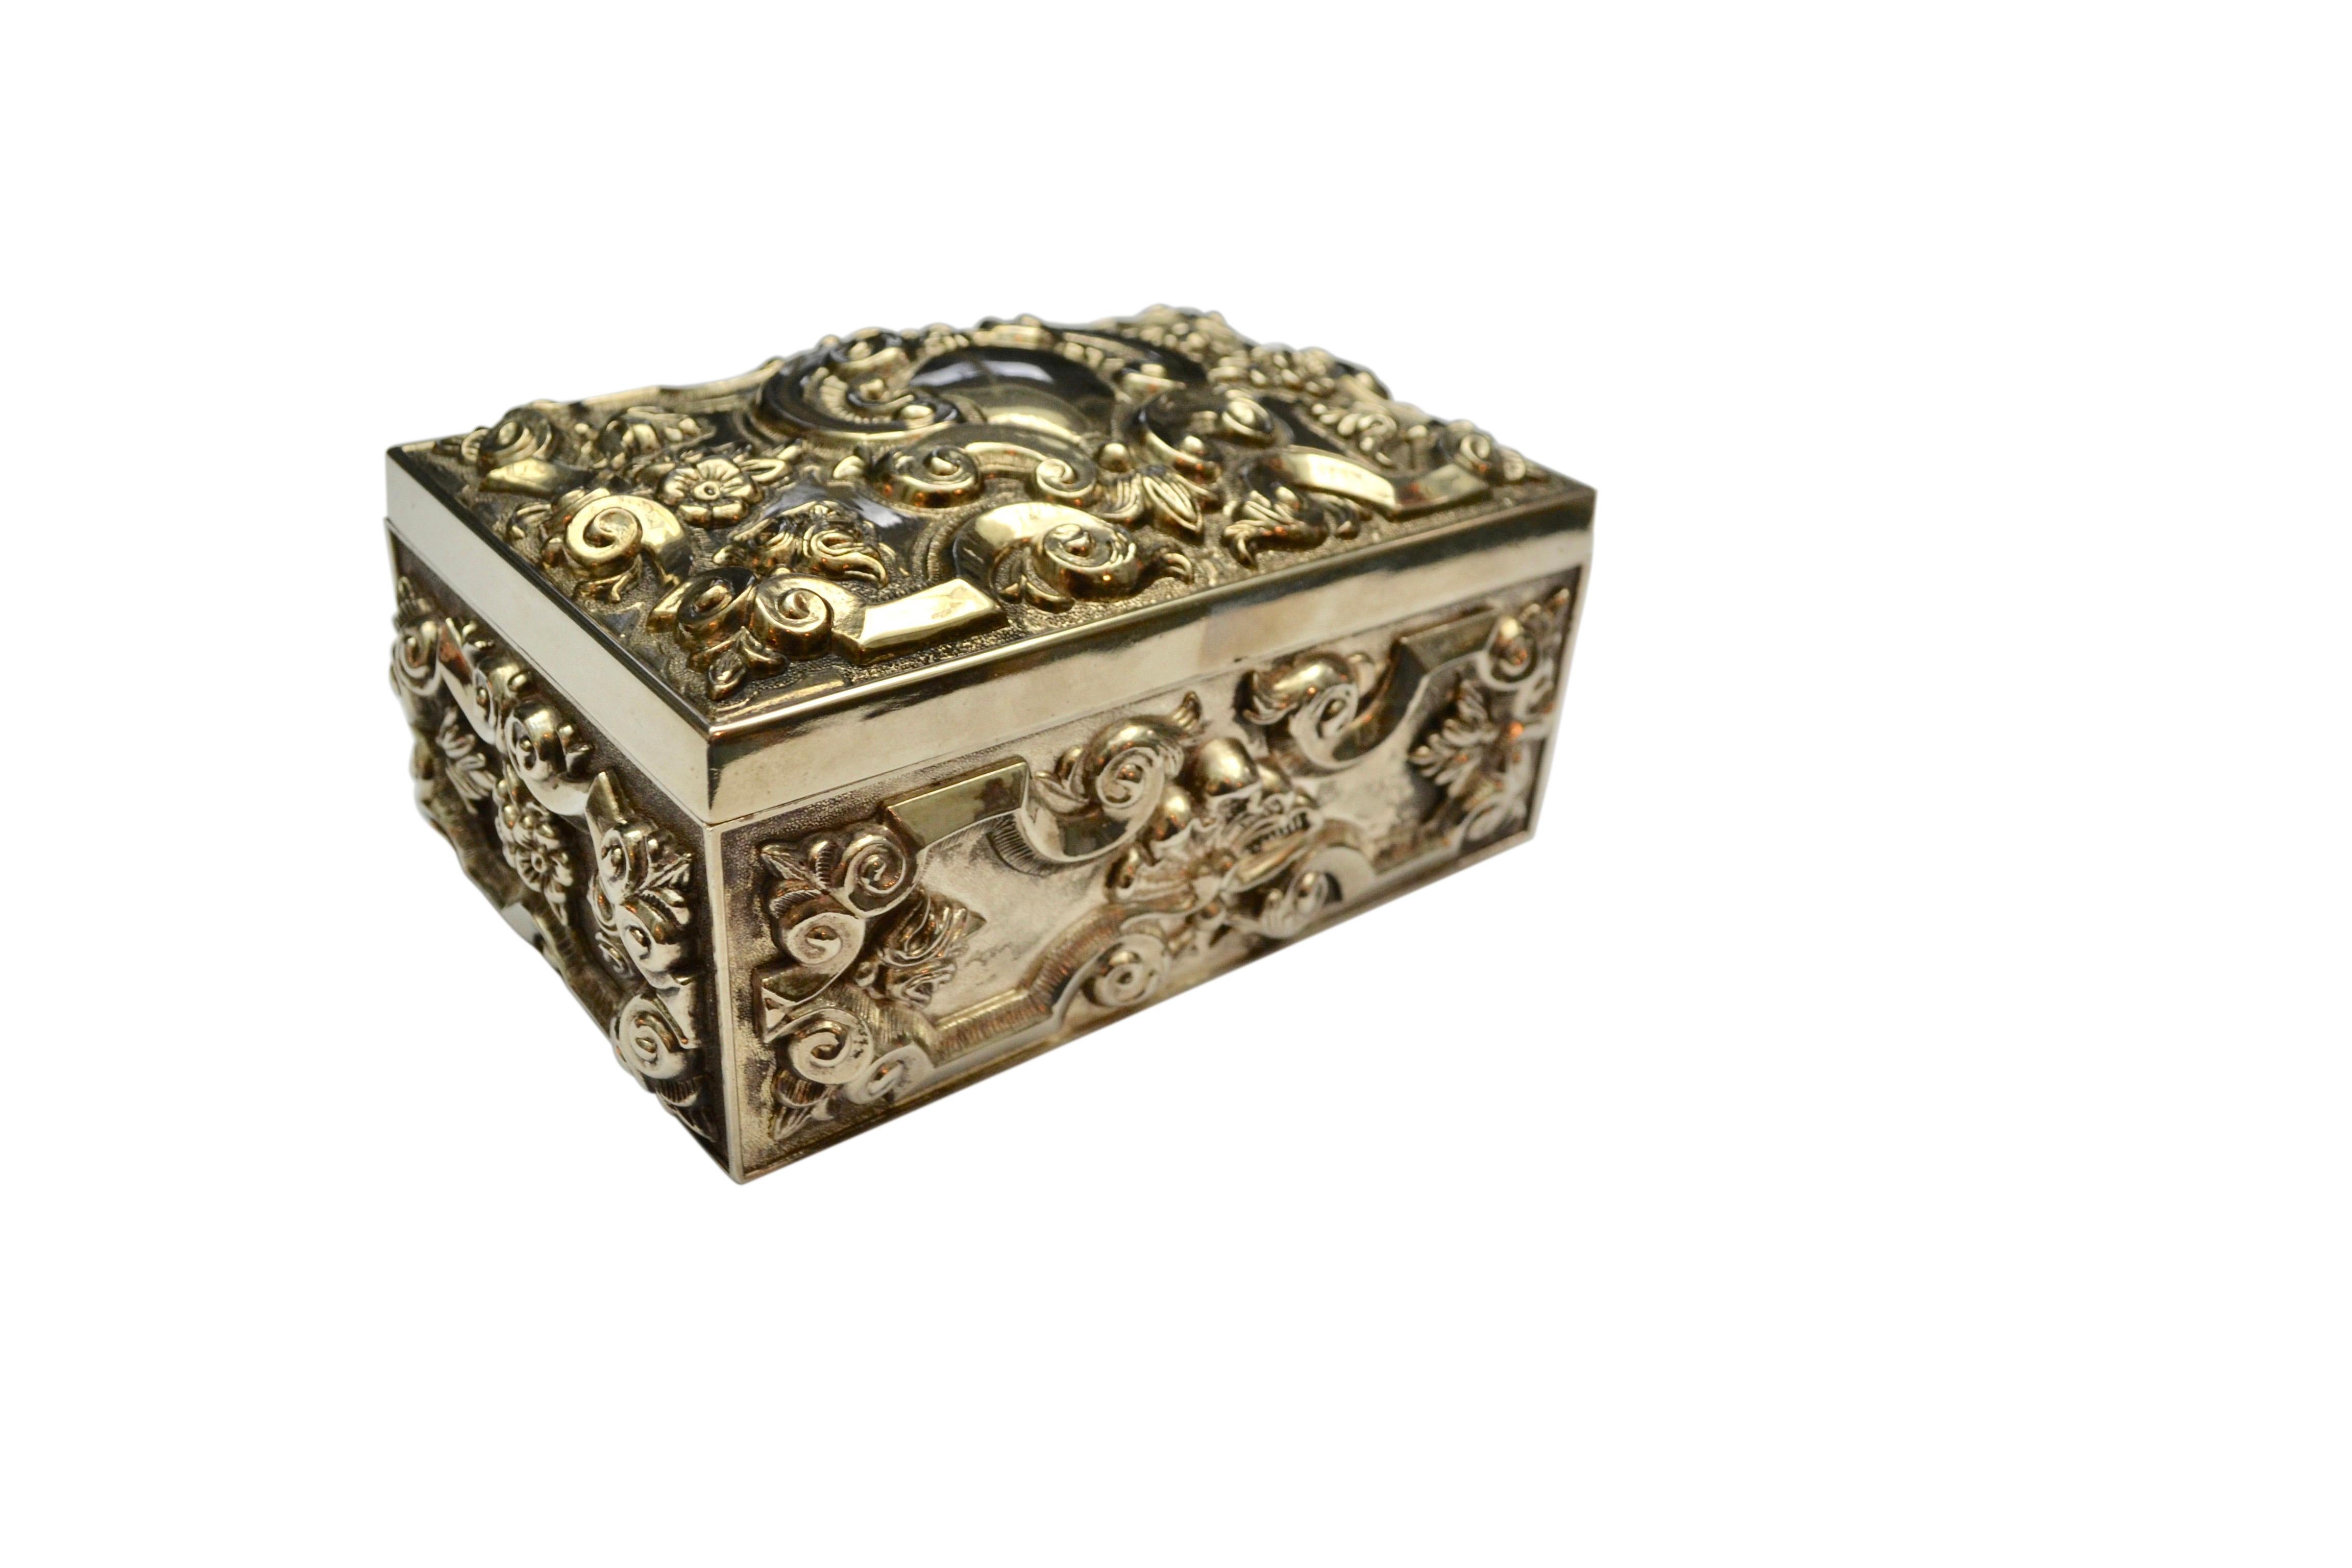 A heavy silver-plated jewellery box with overall scroll work raised on the top and four sides. The overall design includes flowers, scrolls, etc. and the top features a shaped medallion which was likely meant for an engraved name or monogram. The